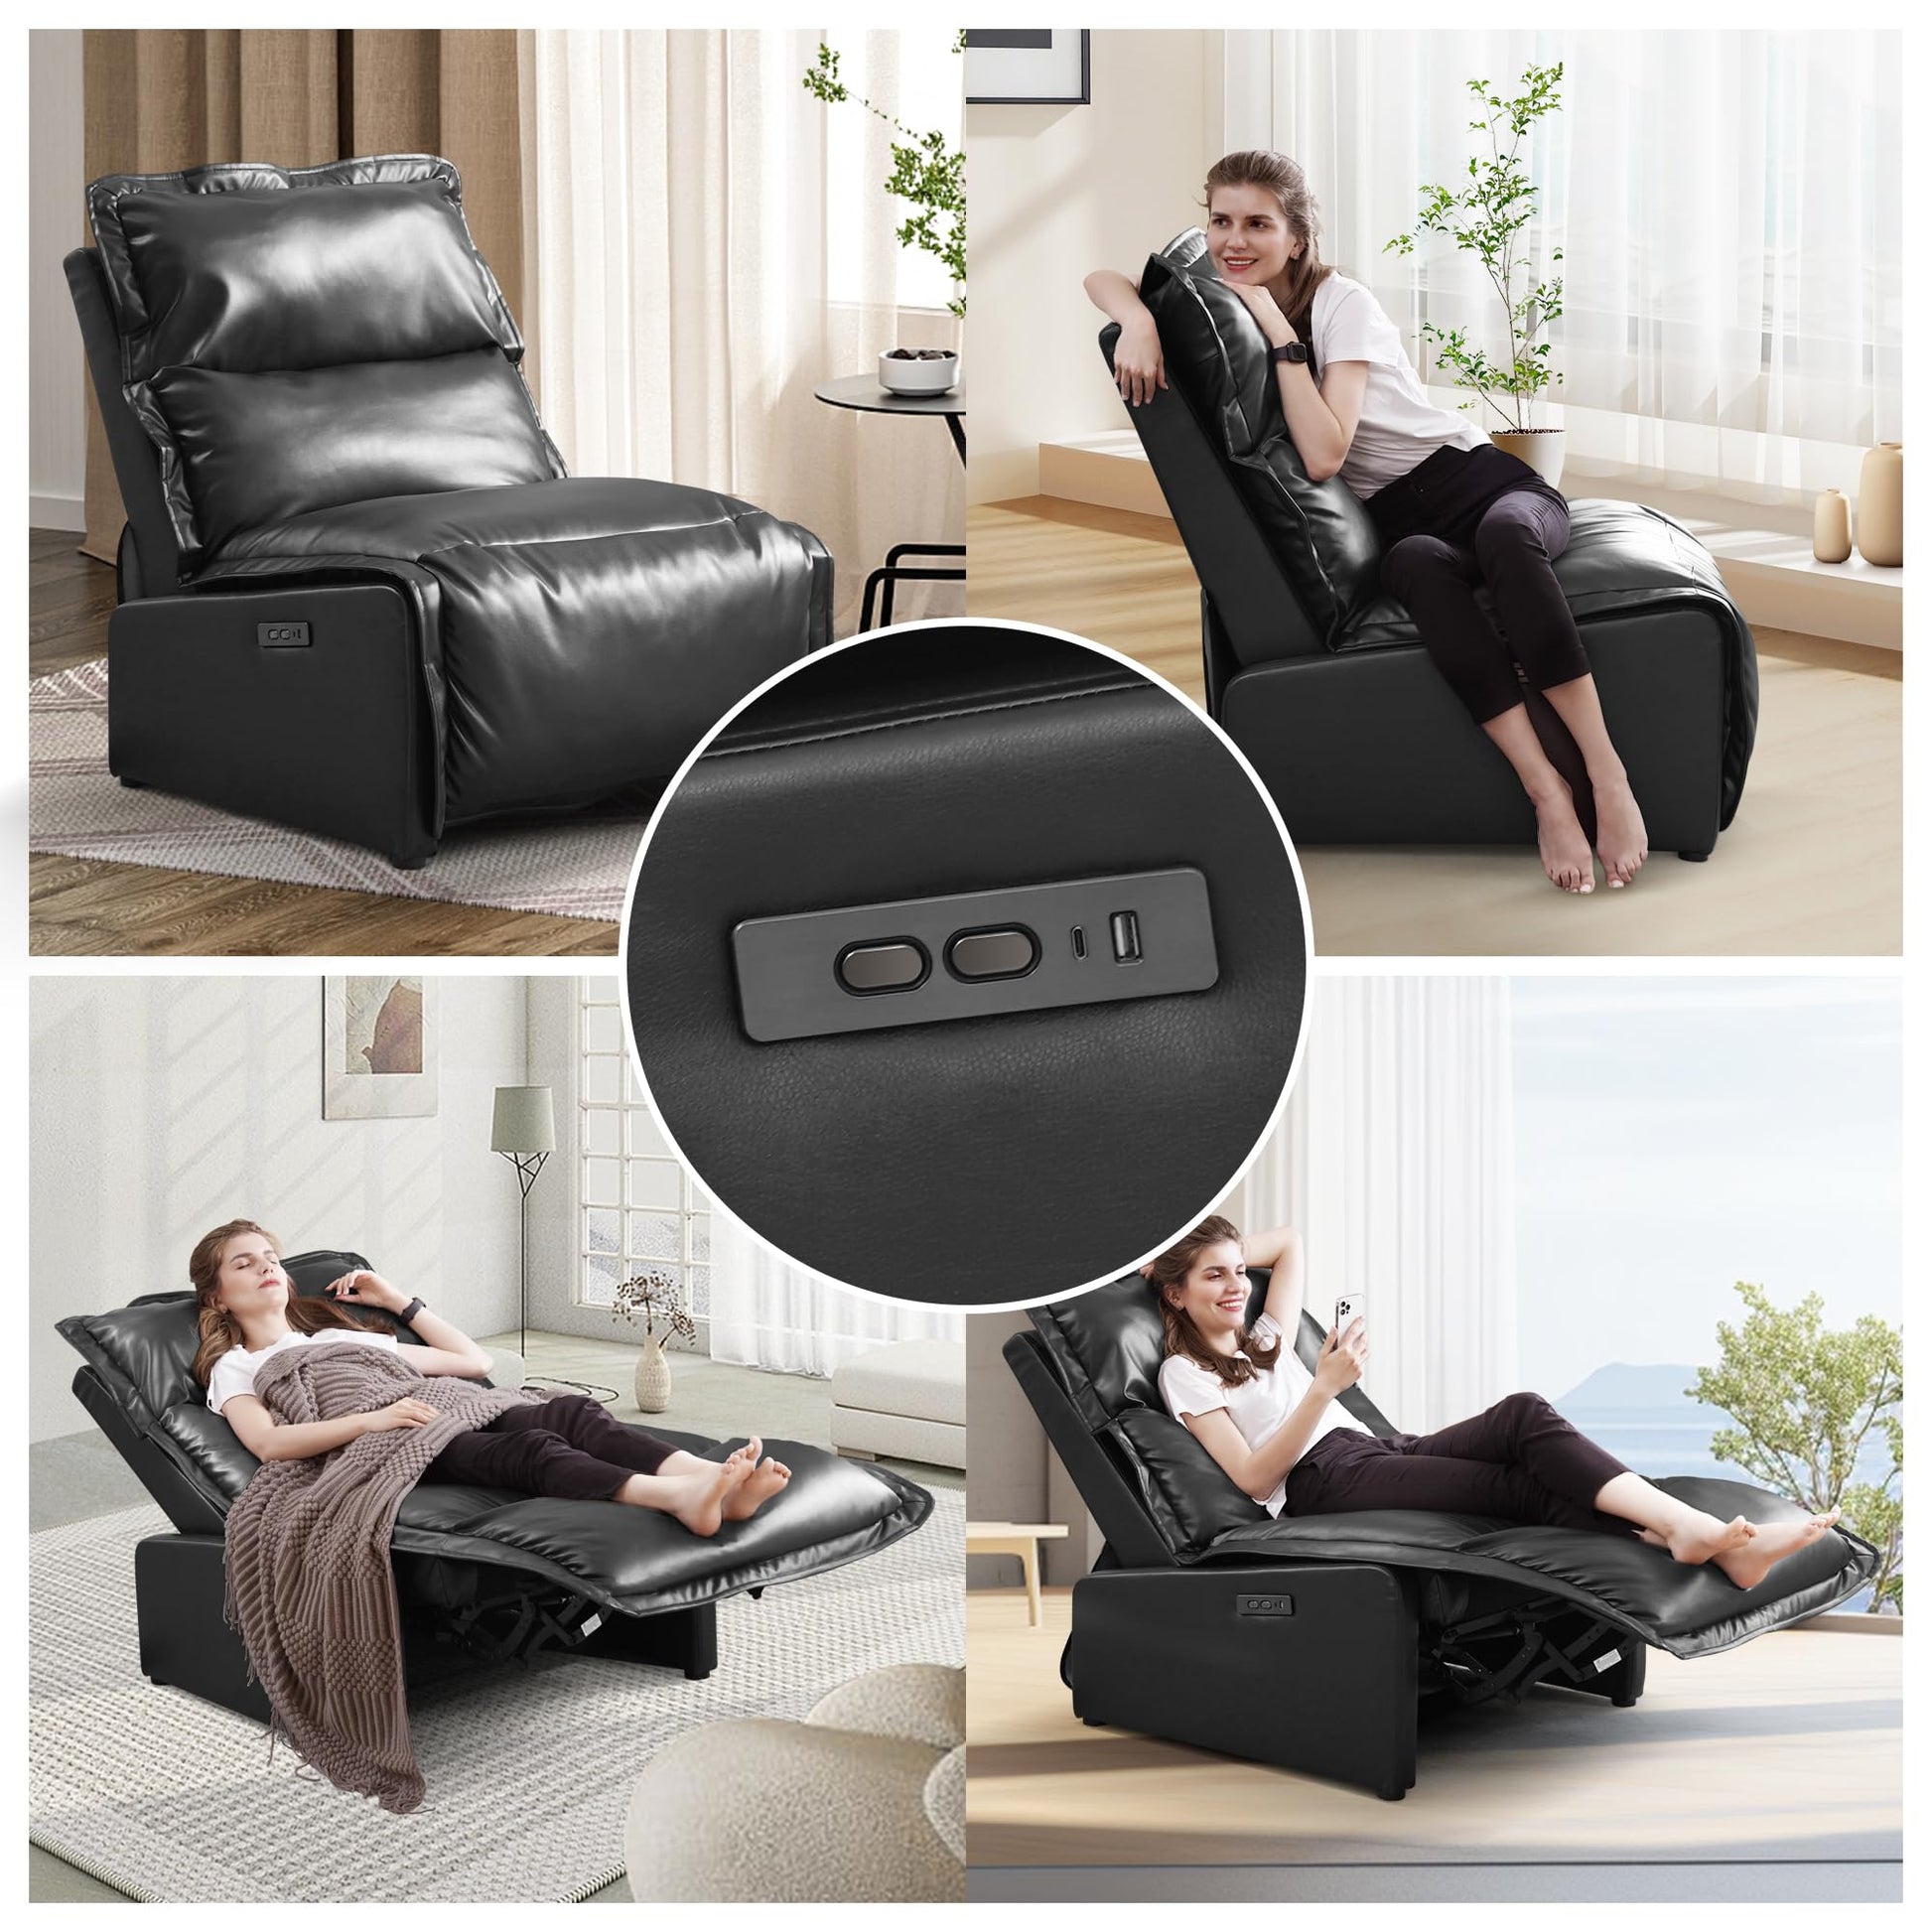 Coosleephome Single Power Recliner Chair Lounger Sofa Bed